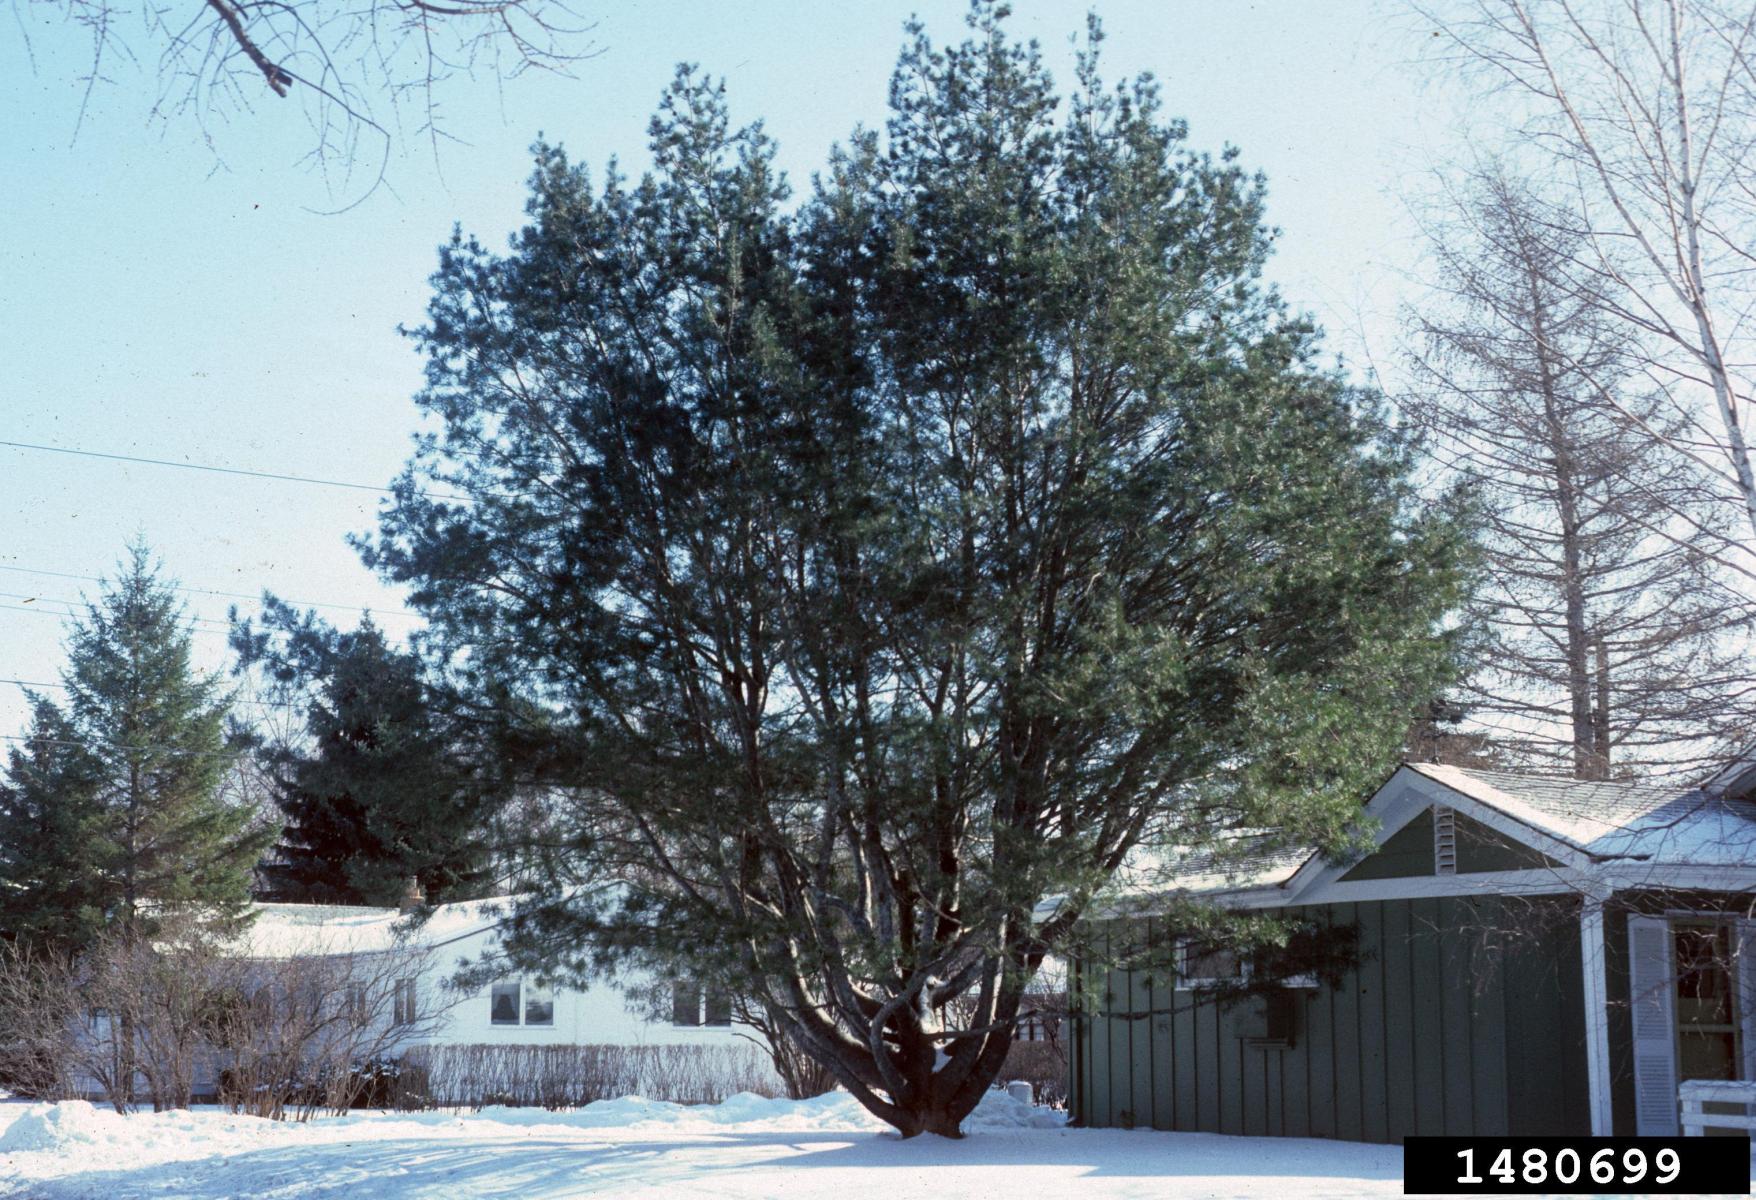 The photo of the Lacebark pine on the left is from: Richard Webb, Bugwood.org